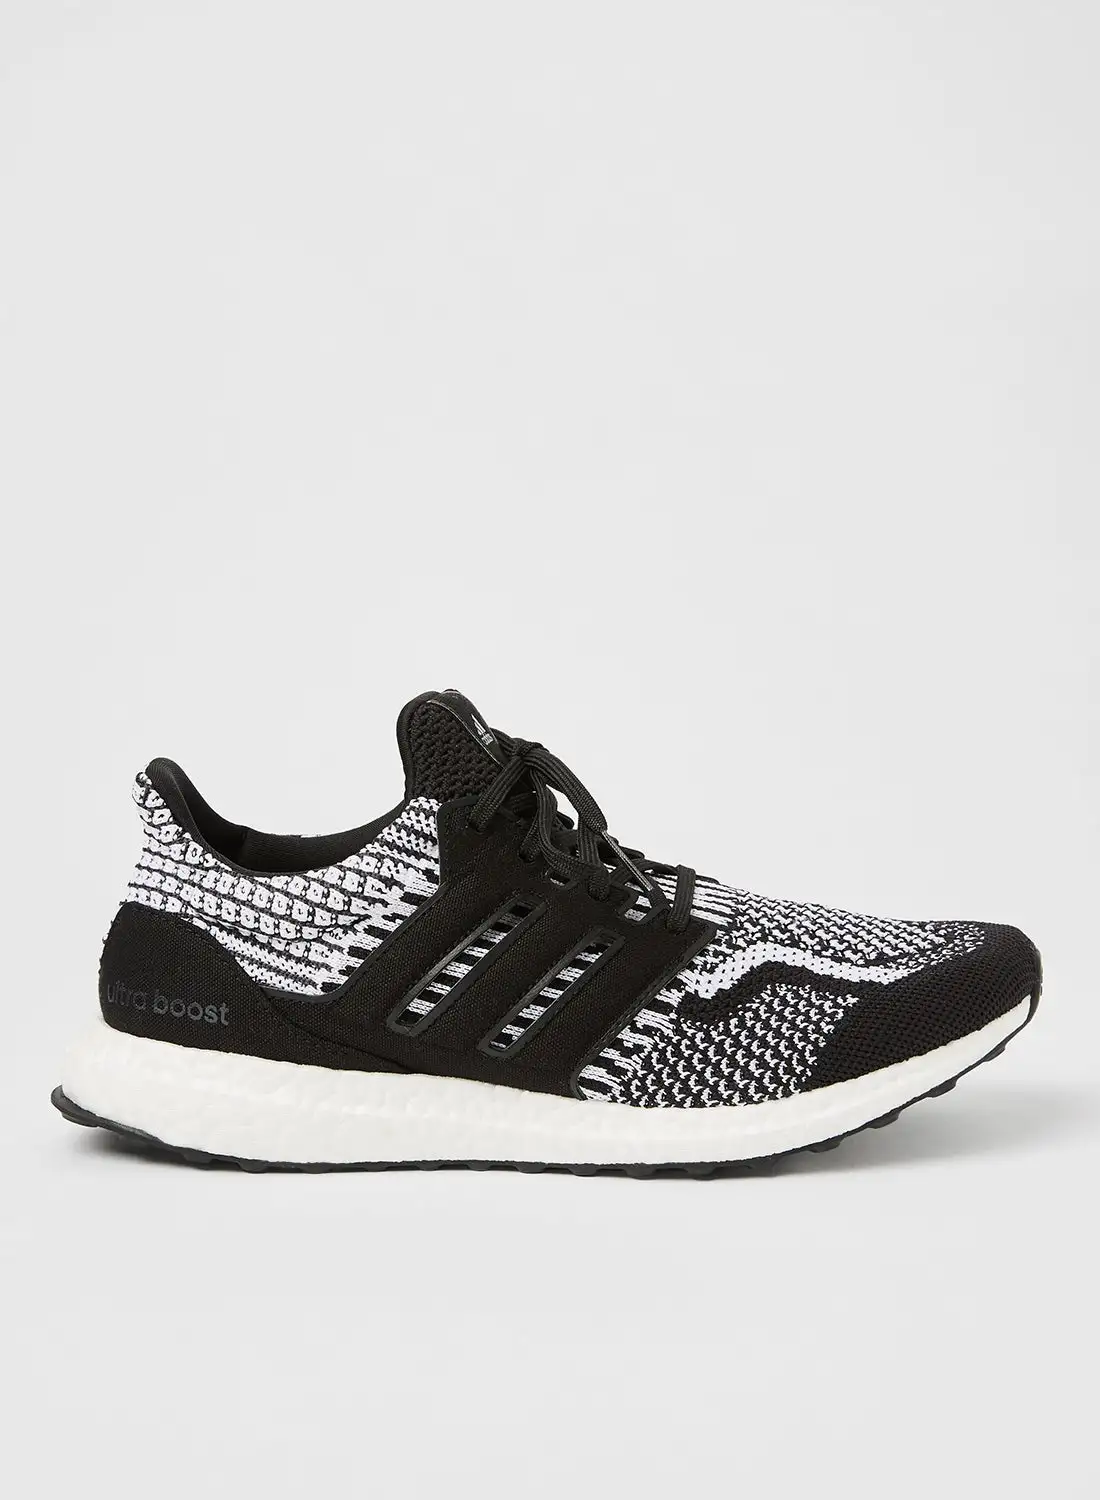 Adidas Ultraboost 5.0 DNA Running Shoes Black/White